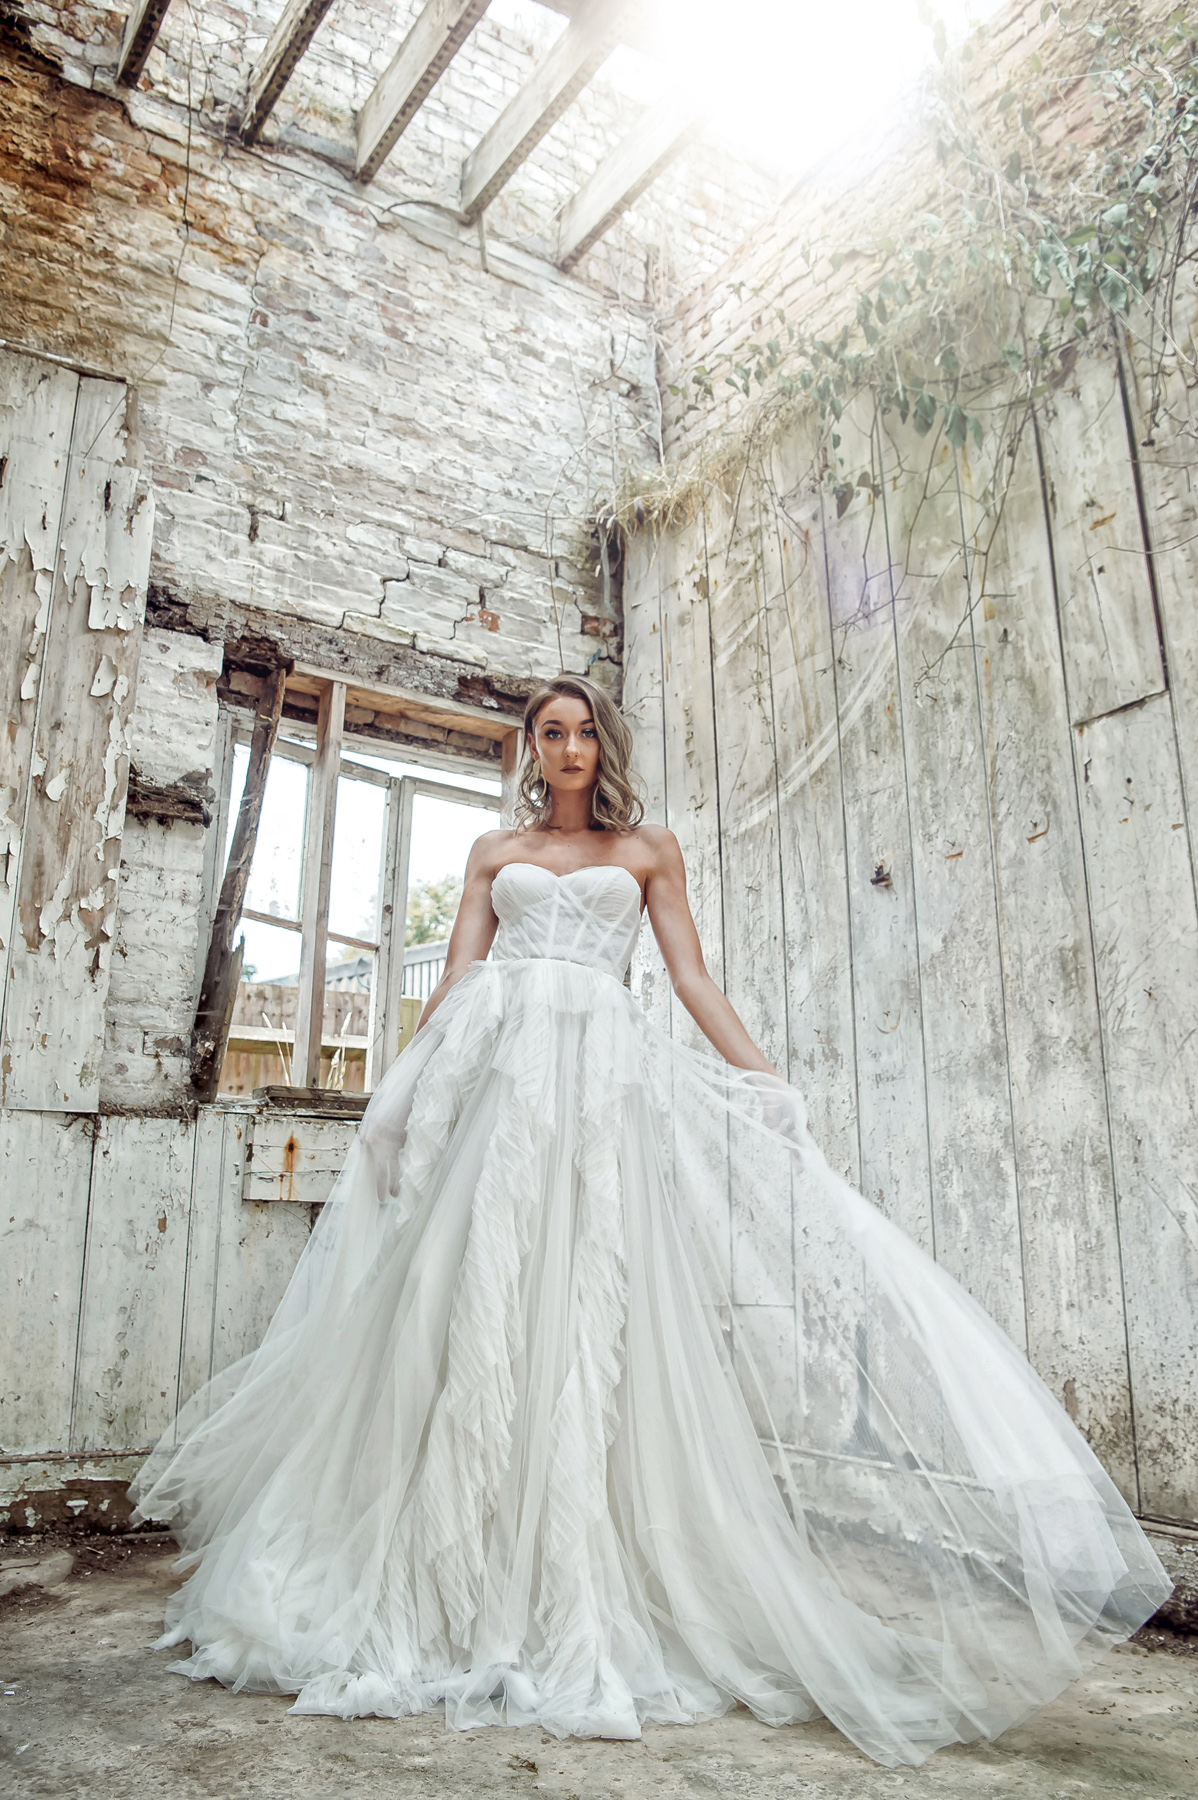 Watters Fross Wedding Collections  - Fross Wedding Collections Bridal Boutique, Uckfield, Surrey: Modern, Glamorous, Statement Wedding Dresses